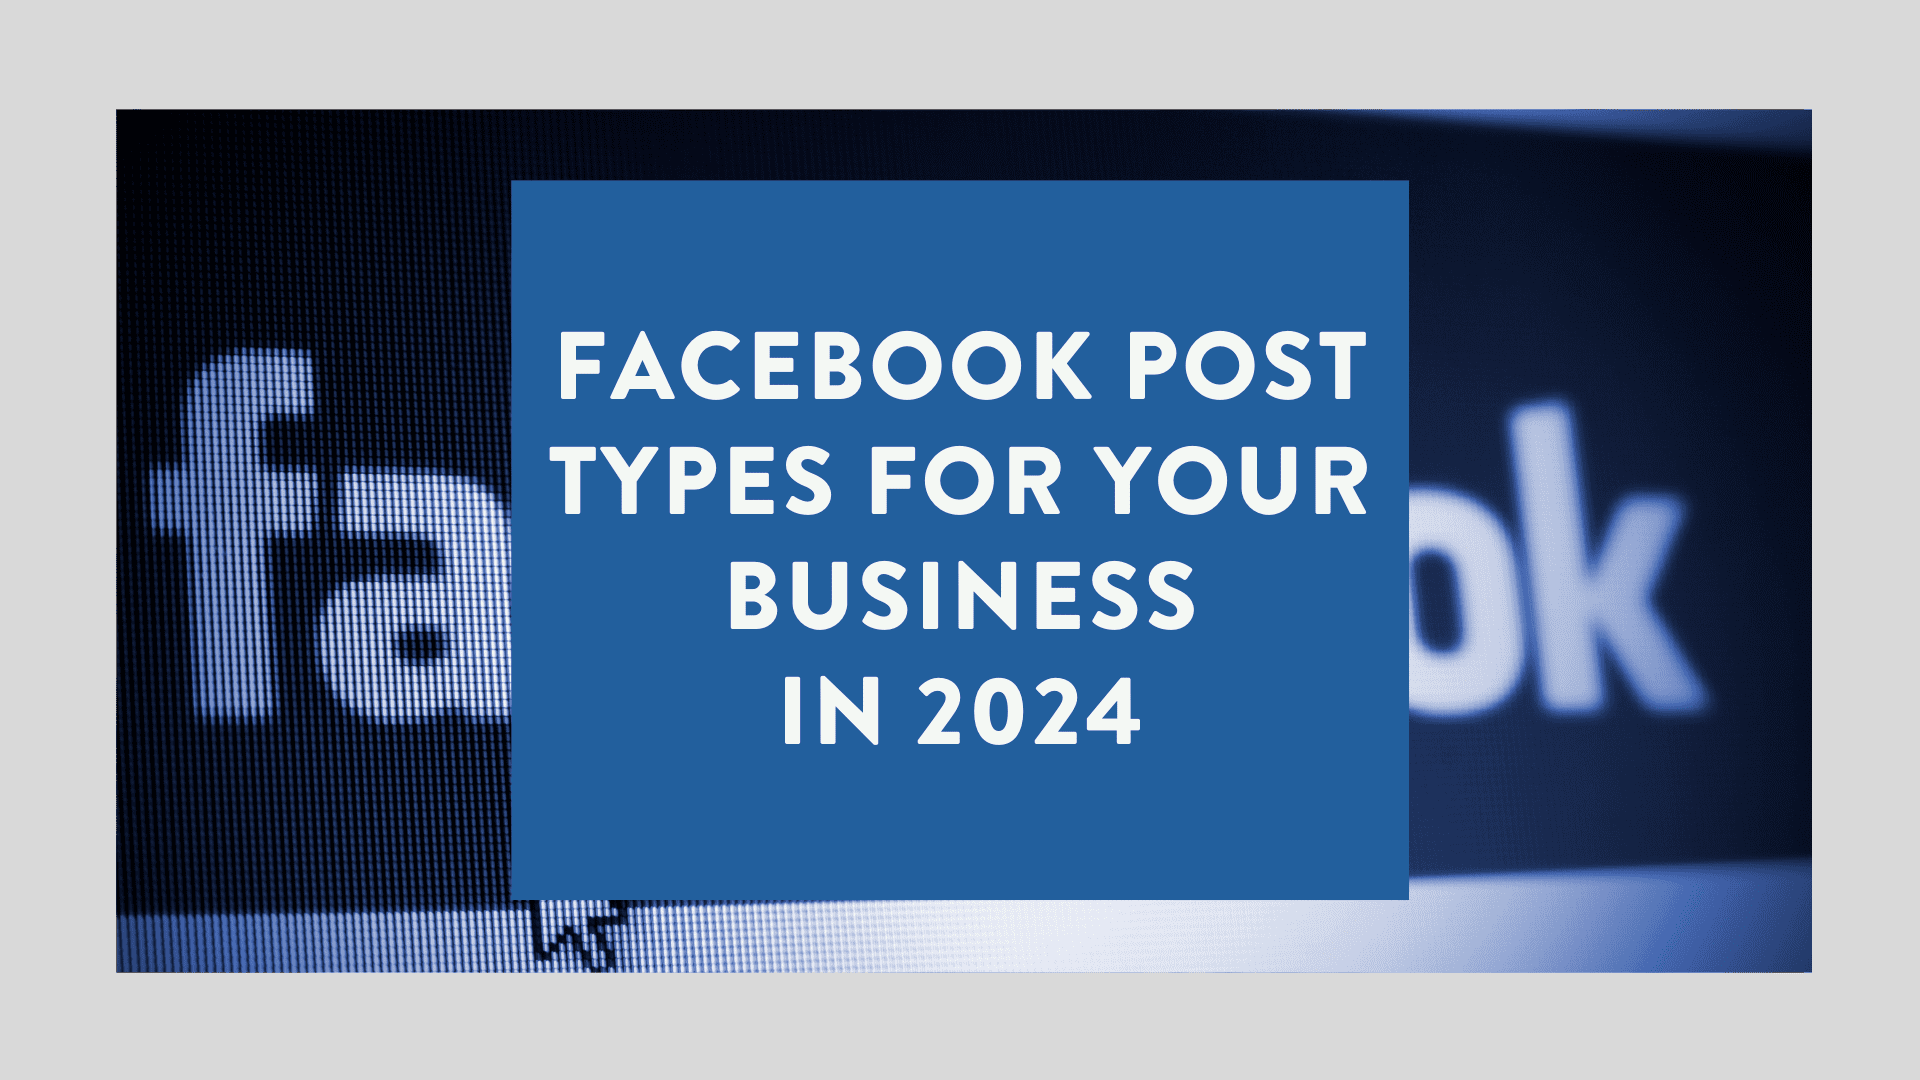 Facebook Post Types for Your Business in 2024